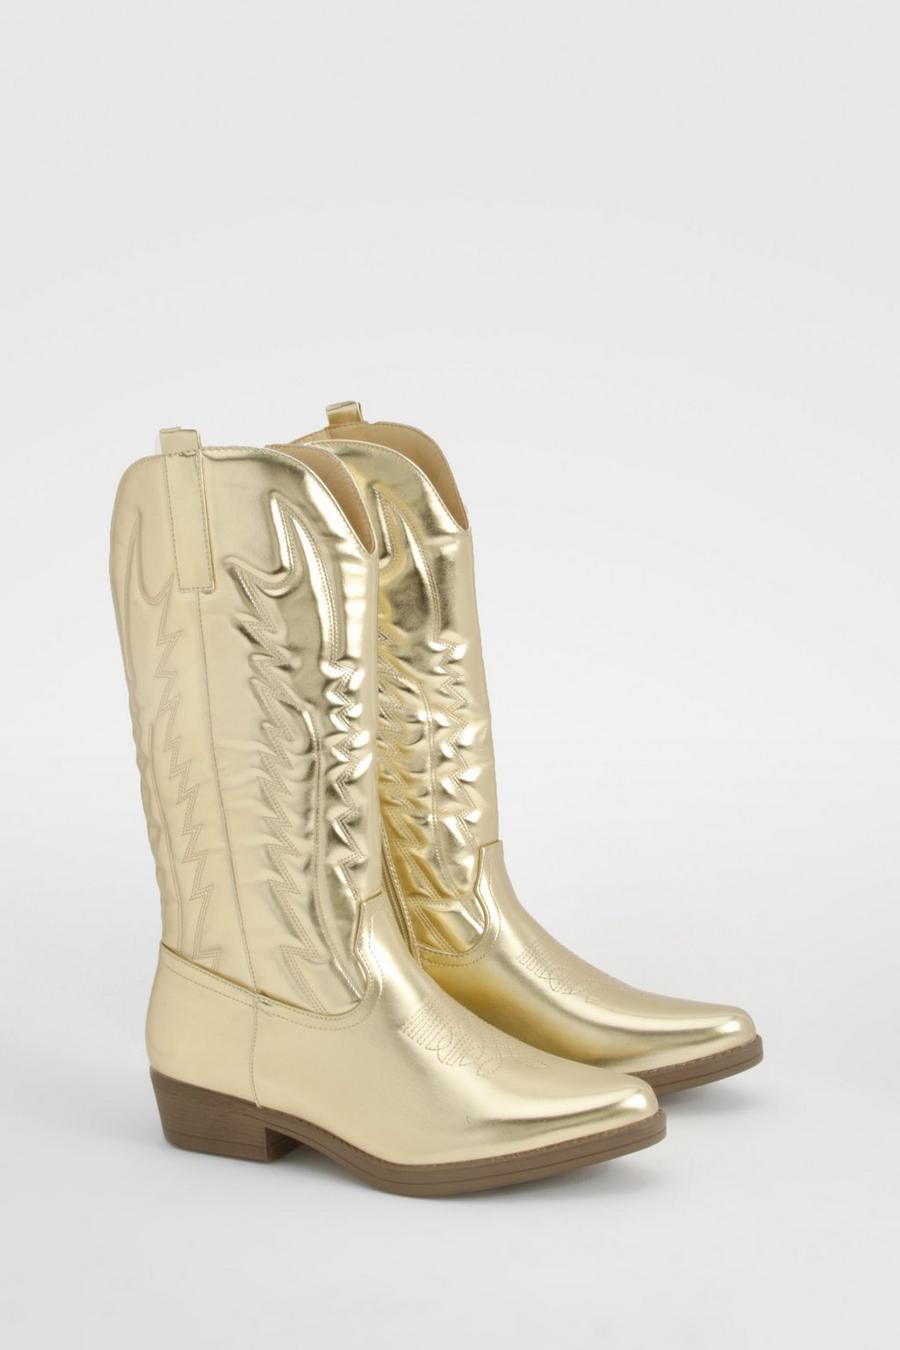 Gold Metallic Embroidered Detail Western Cowboy Boots    